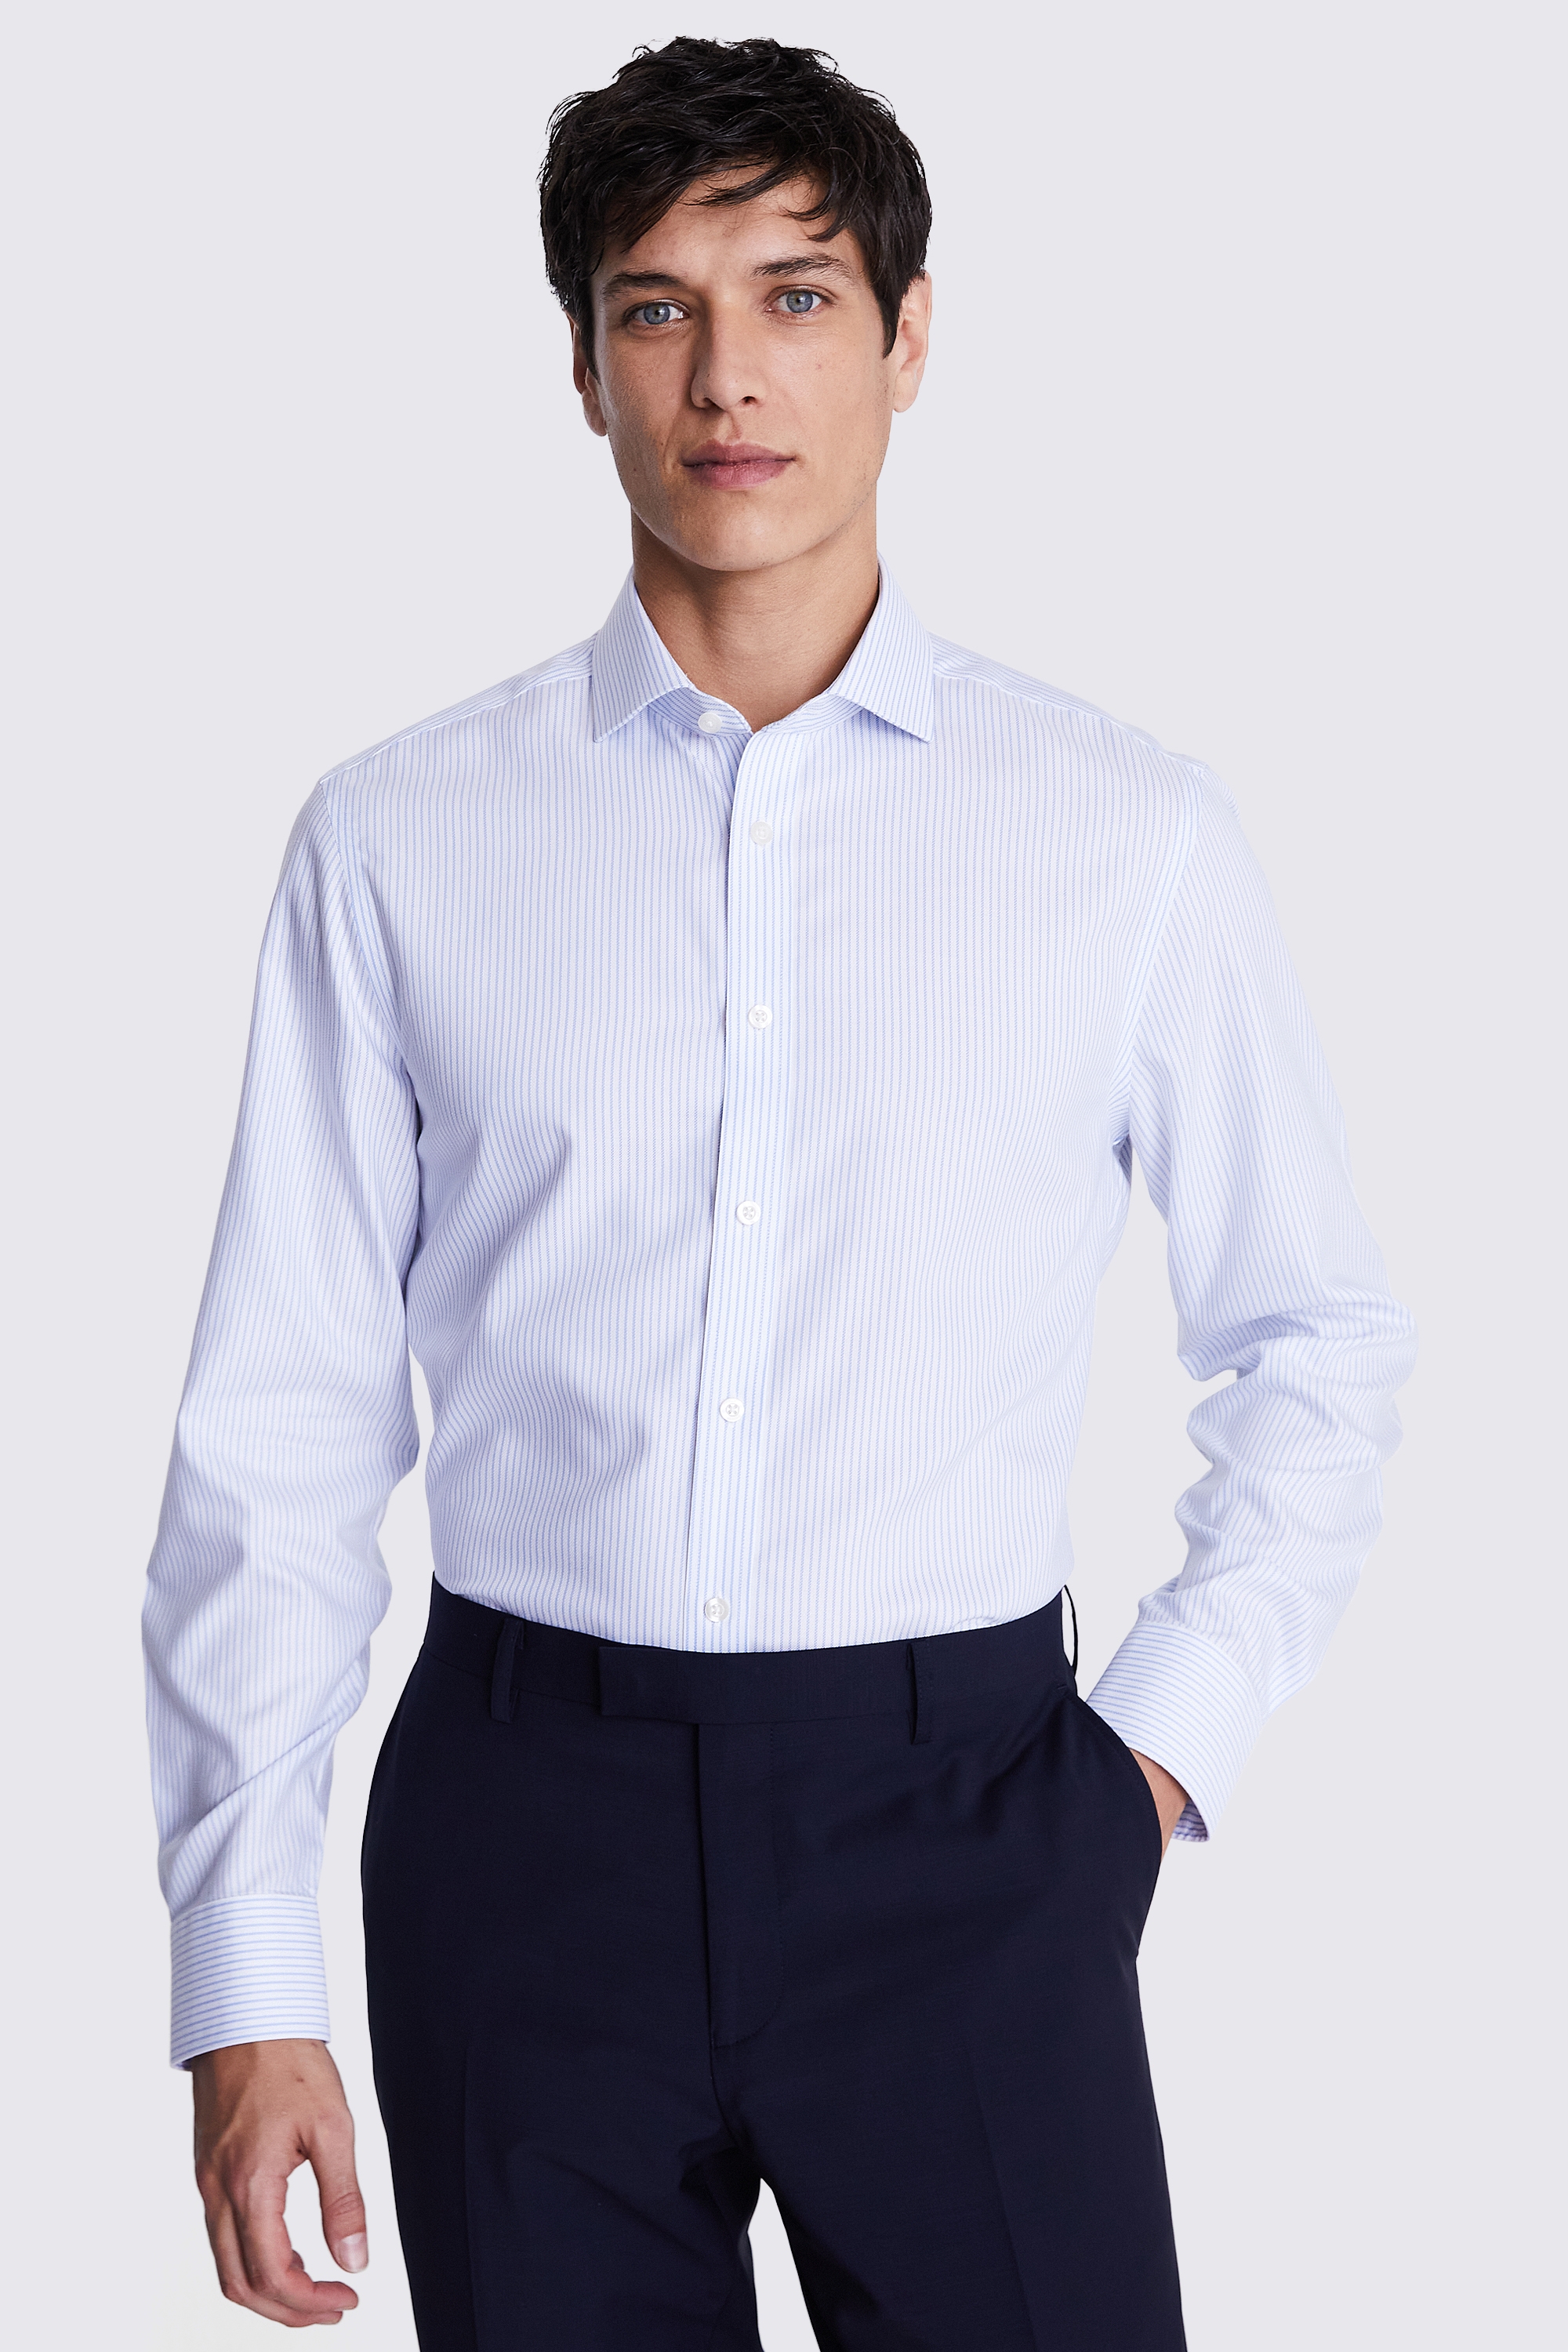 Tailored Fit Sky Royal Oxford Stripe Non-Iron Shirt | Buy Online at Moss